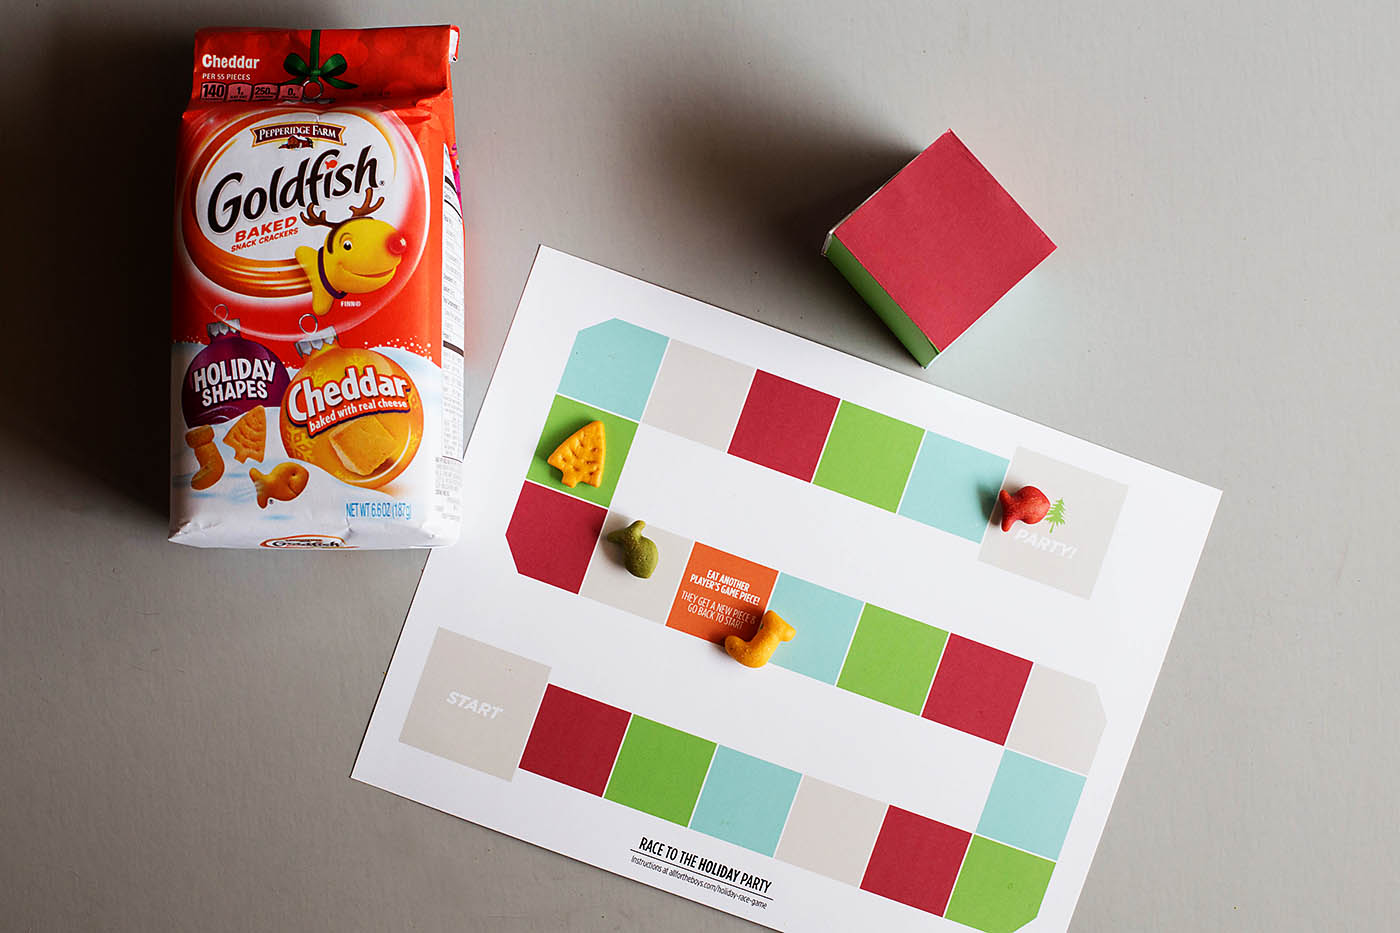 Printable holiday game with edible playing pieces!